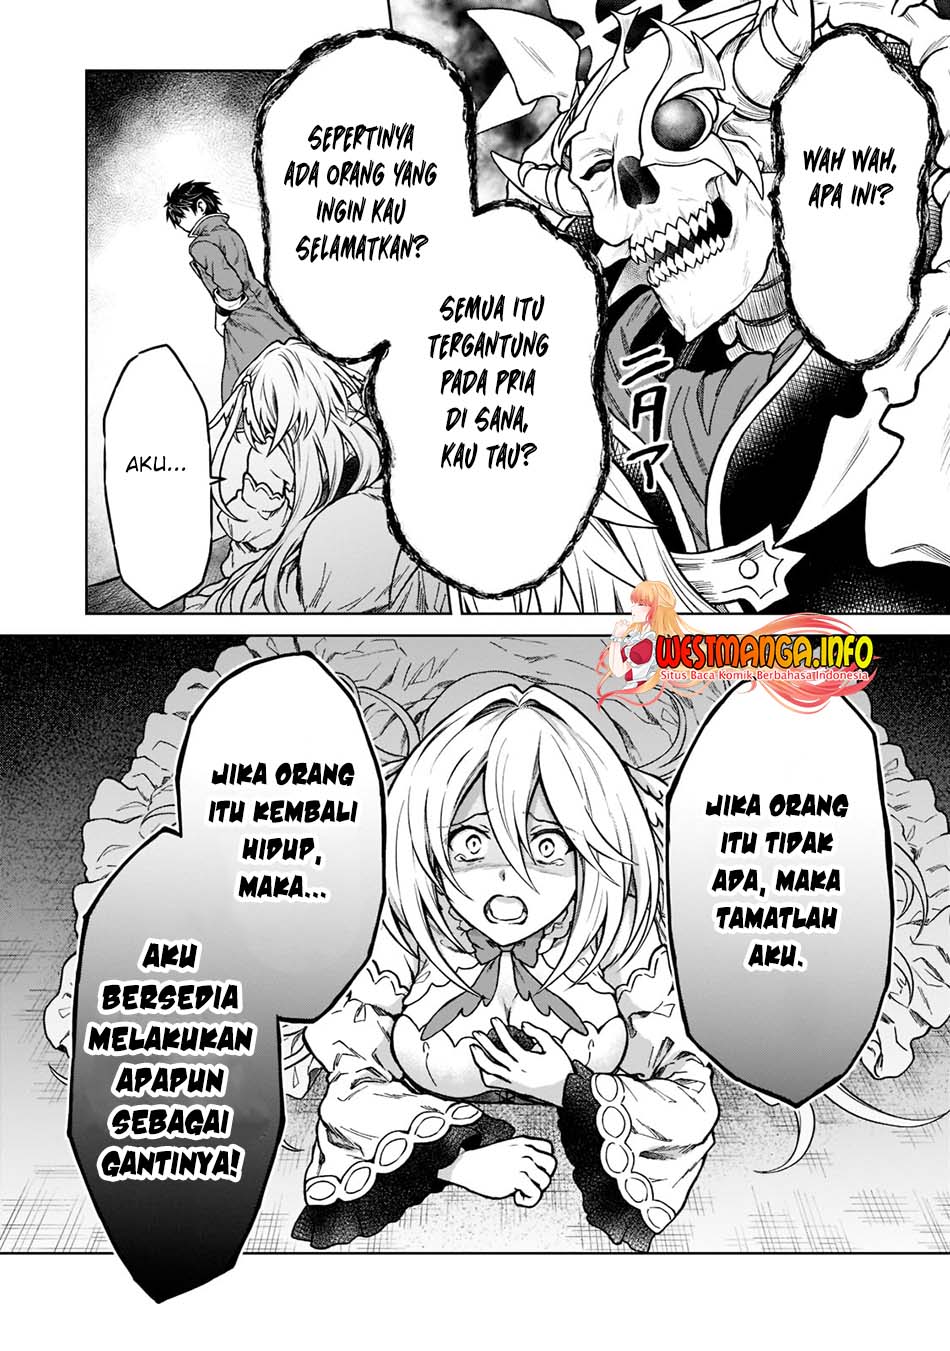 Dilarang COPAS - situs resmi www.mangacanblog.com - Komik d rank adventurer invited by a brave party and the stalking princess 011 - chapter 11 12 Indonesia d rank adventurer invited by a brave party and the stalking princess 011 - chapter 11 Terbaru 14|Baca Manga Komik Indonesia|Mangacan